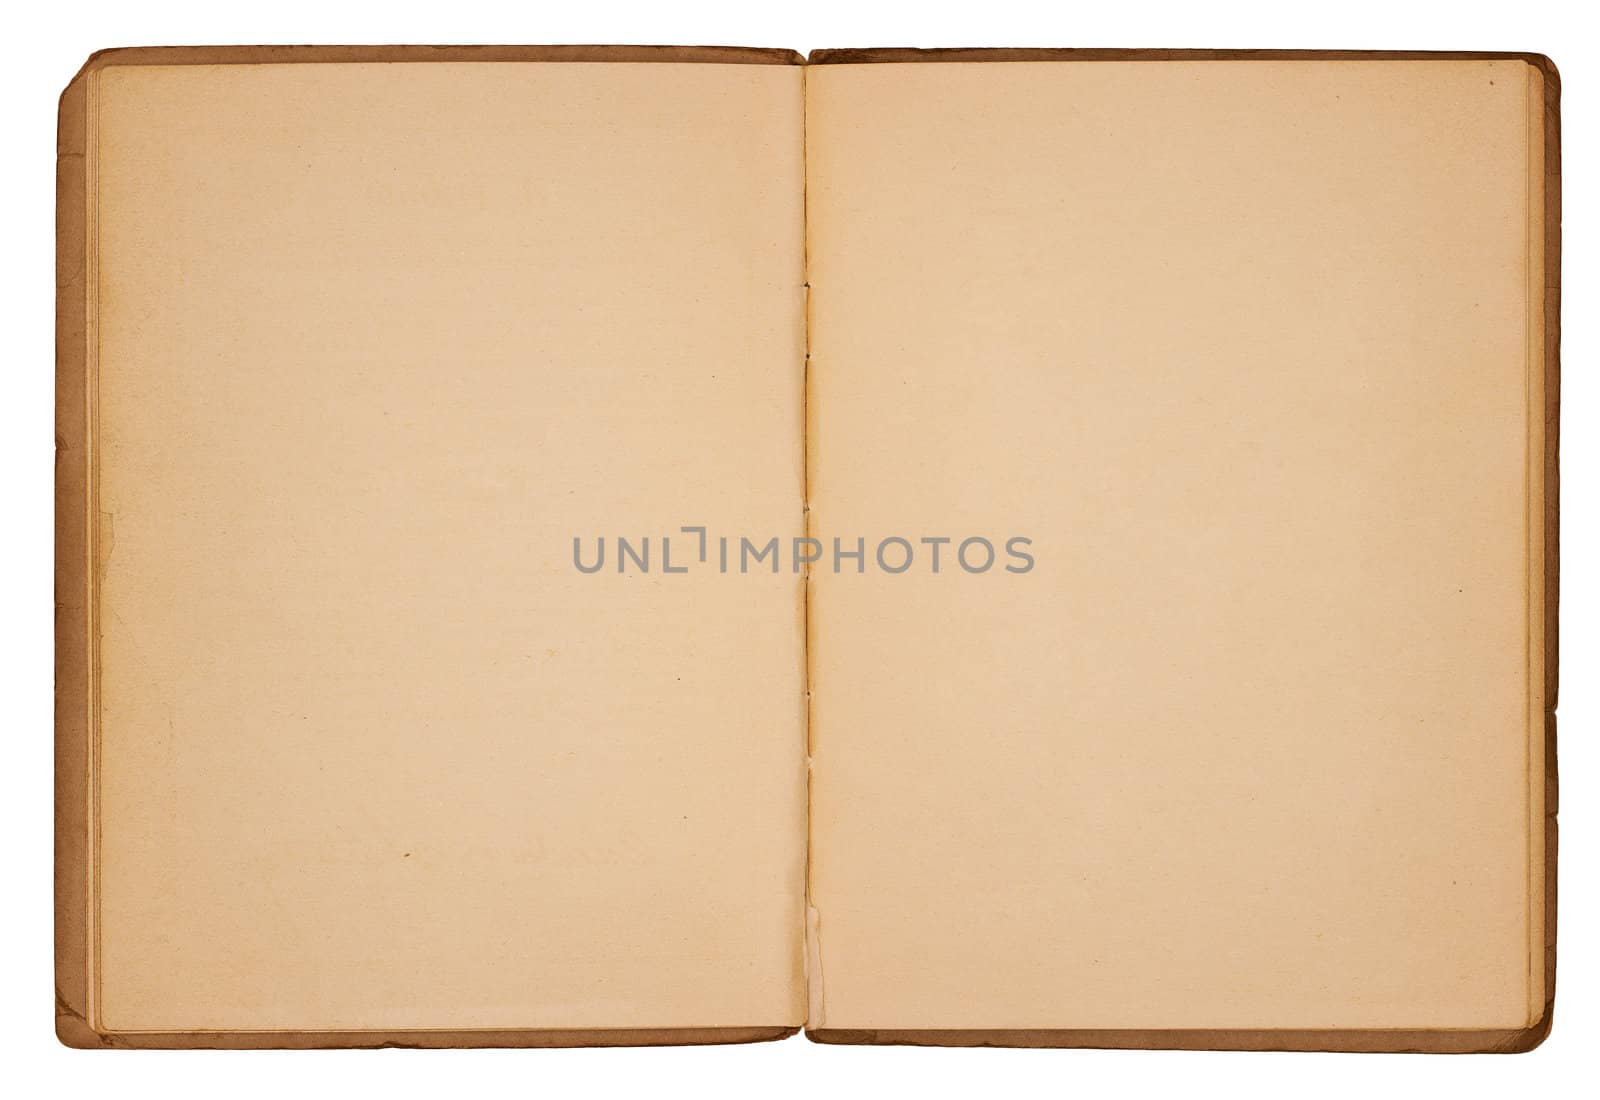 A vintage booklet viewed from above and opened to reveal blank, yellowing pages with rough, creased edges and dog-eared corners. Isolated on white. Includes clipping path.